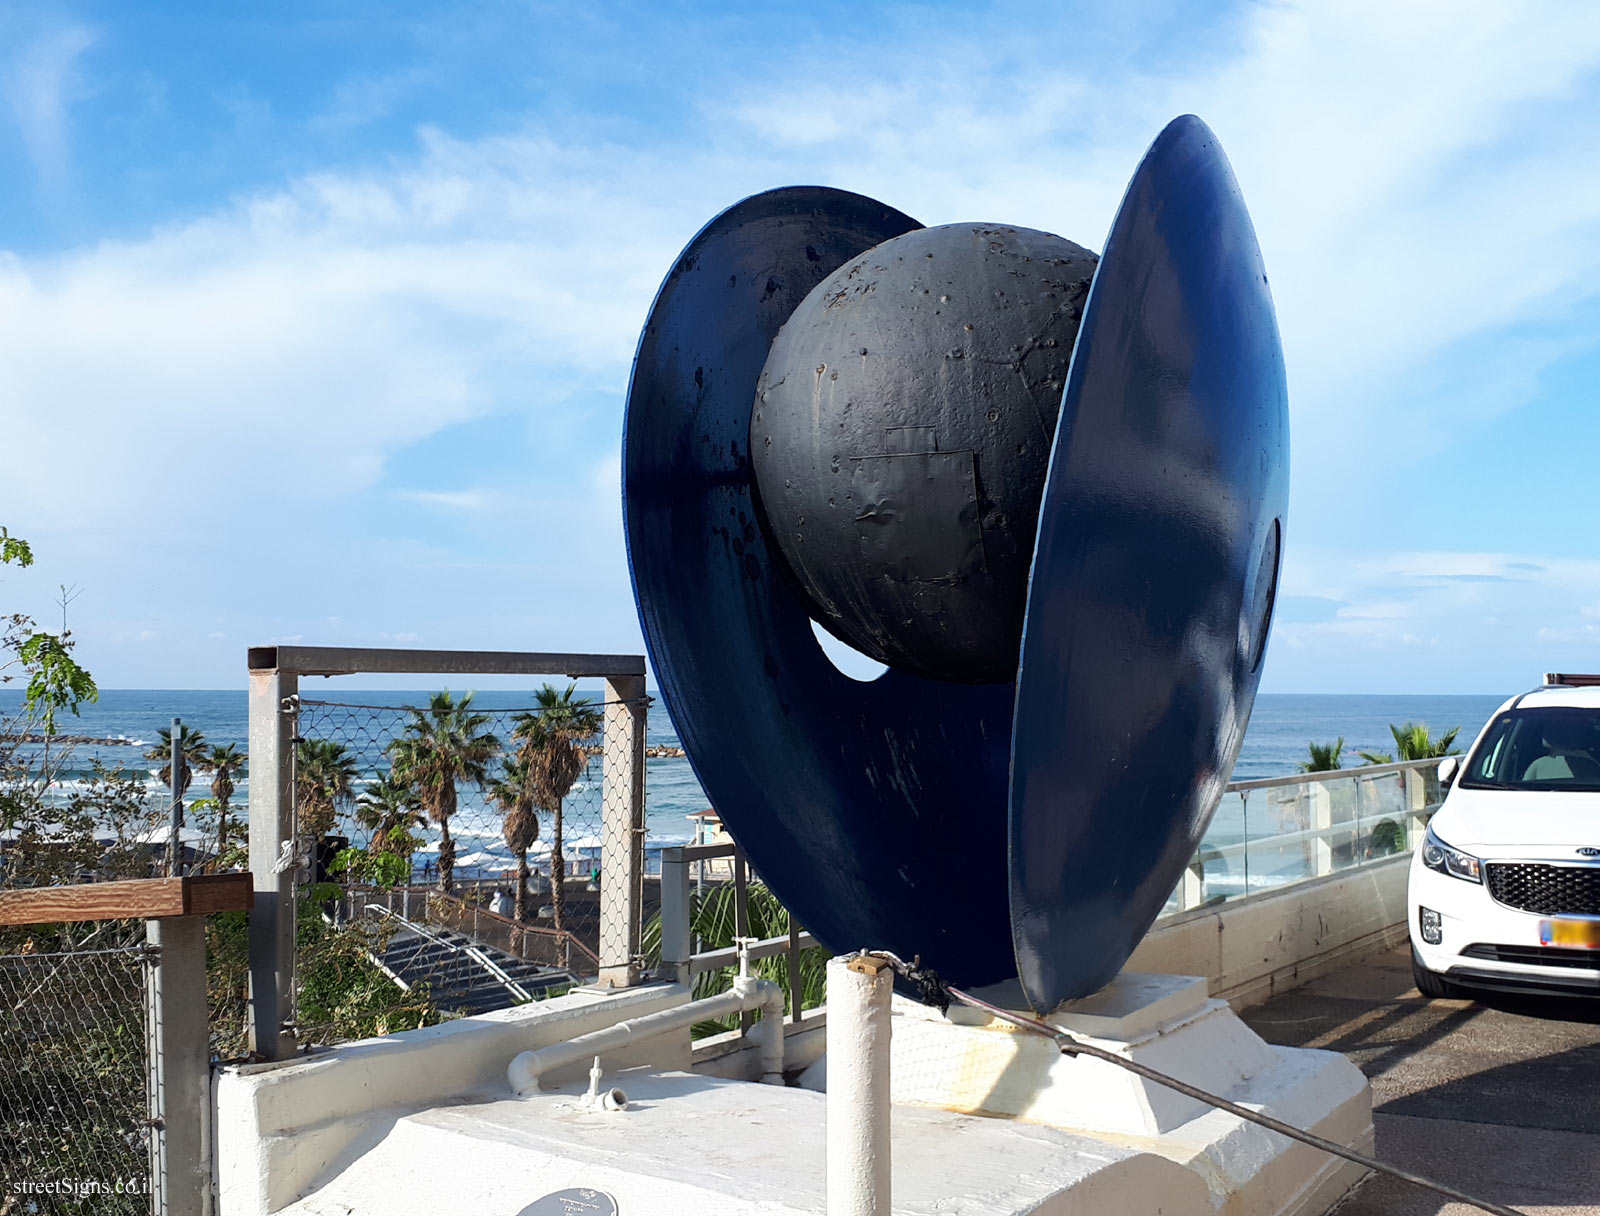 "Untitled" - Outdoor sculpture by Gedalia Suchowolsky - Shalag square, Tel Aviv-Yafo, Israel